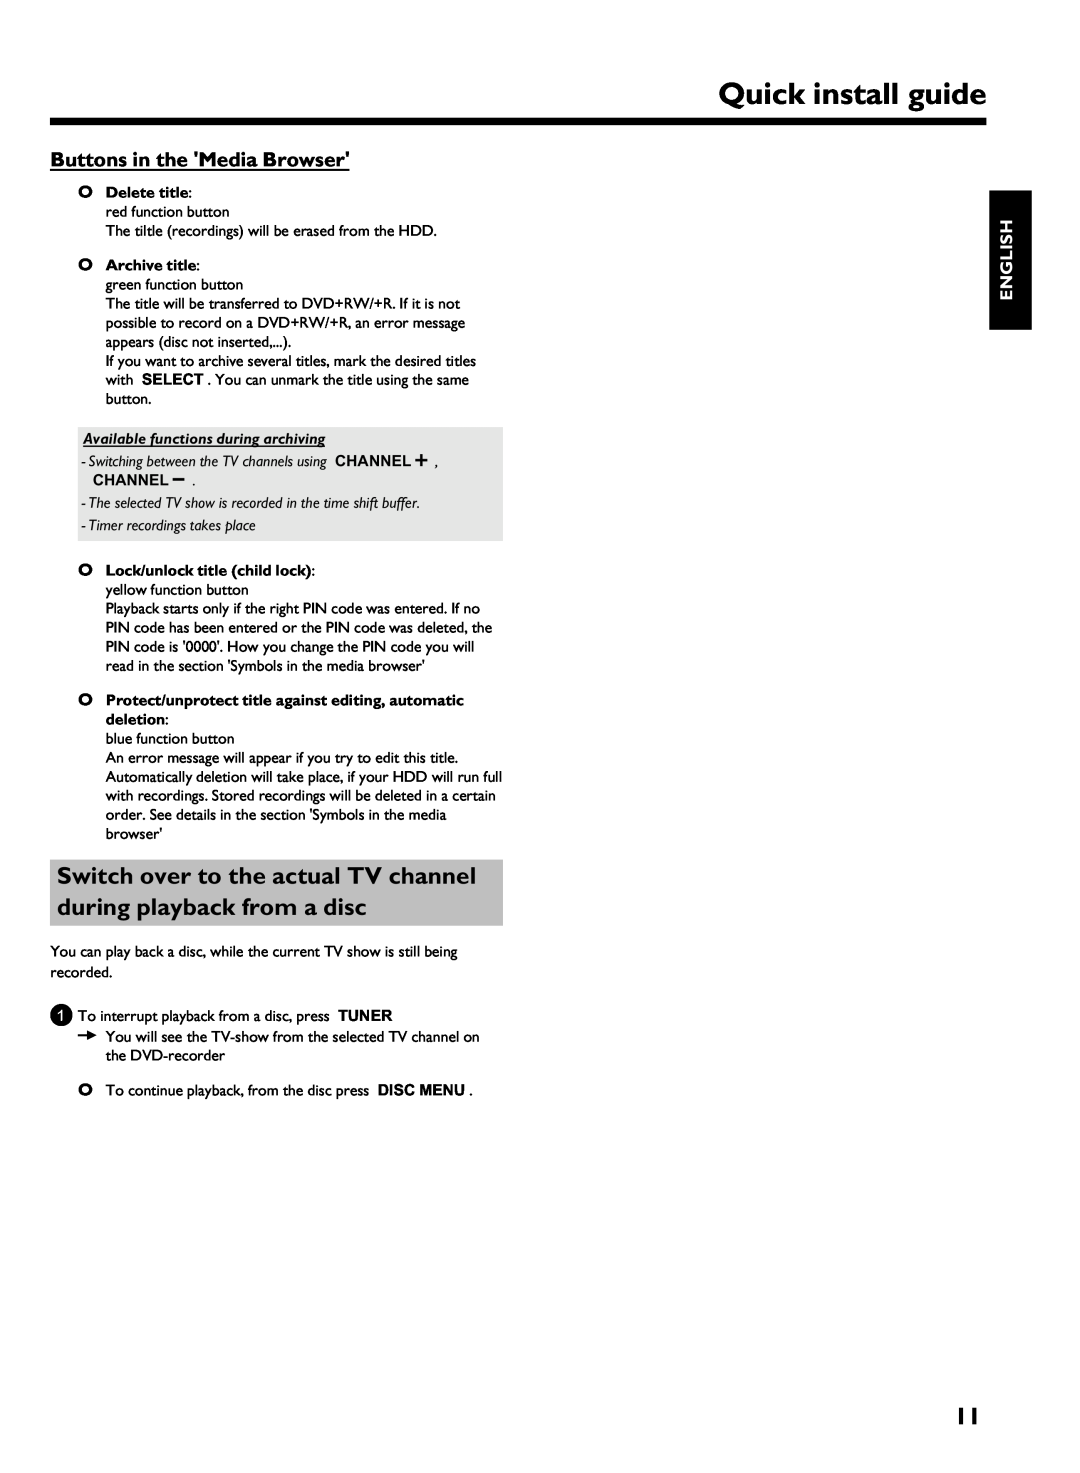 Philips HDRW720/69 user manual Buttons in the Media Browser, Quick install guide, English, O Delete title, O Archive title 